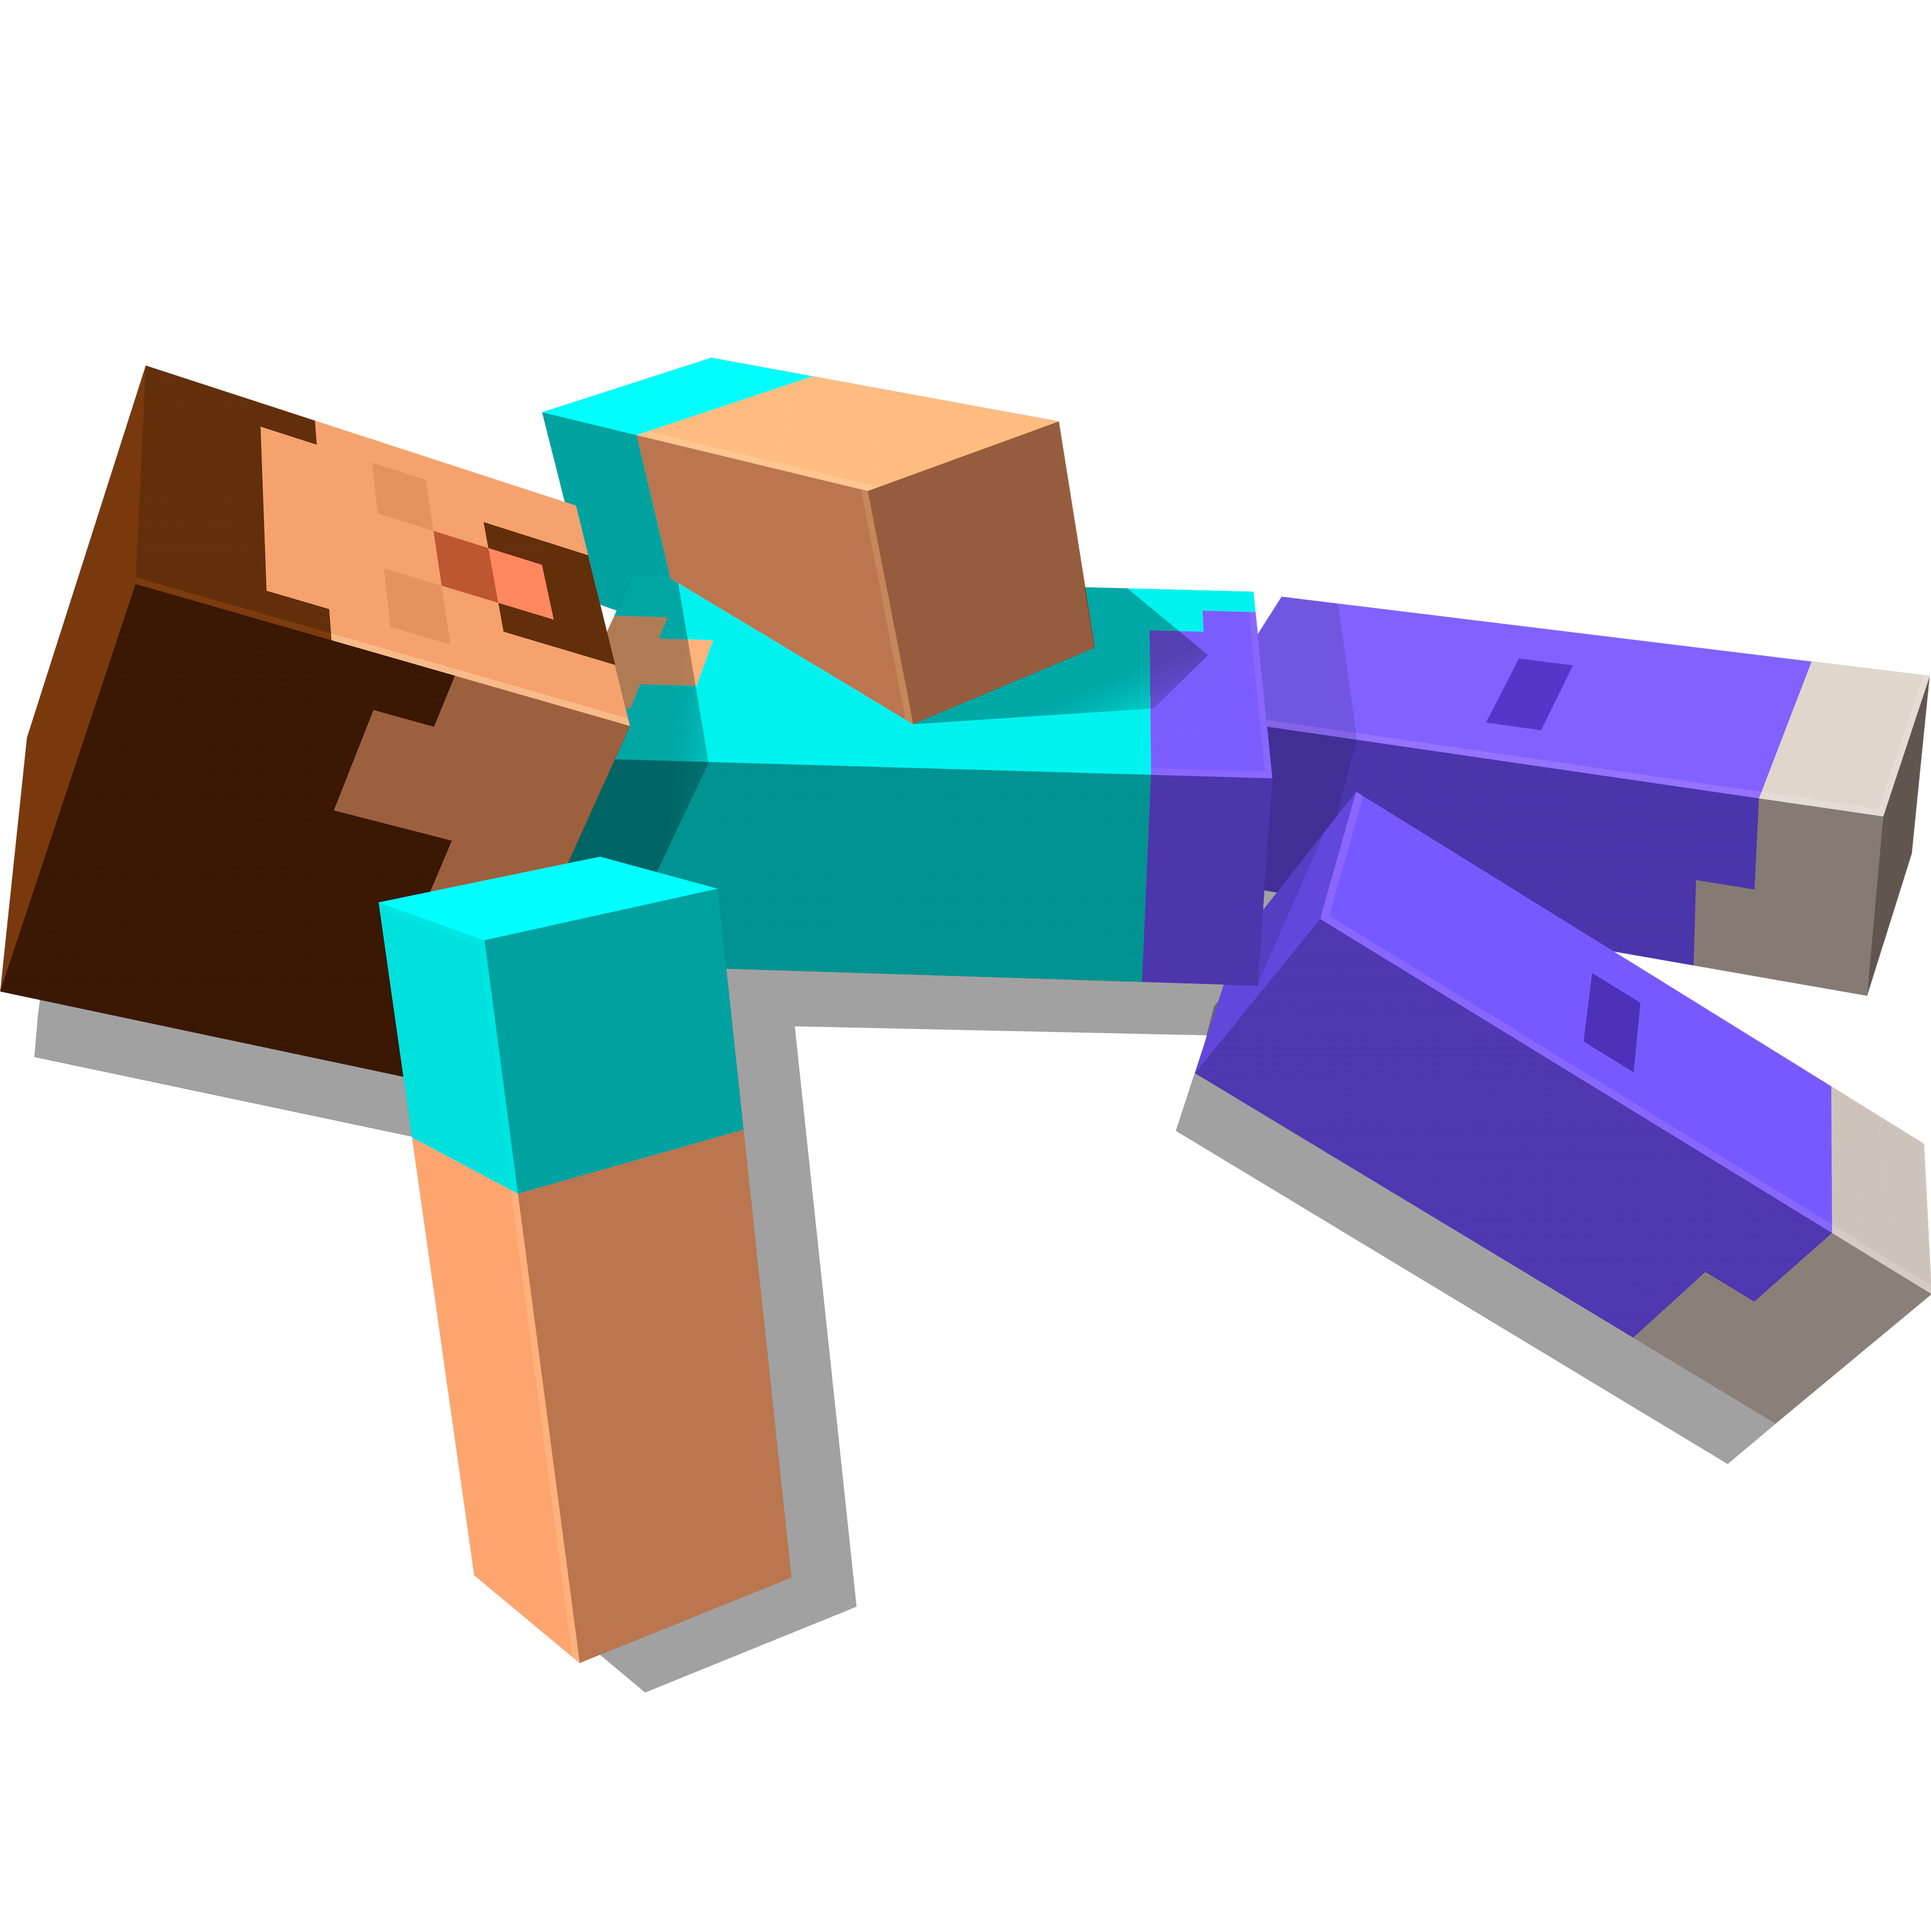 A Minecraft character with the default Steve texture lays on top of a screenshot sleeping